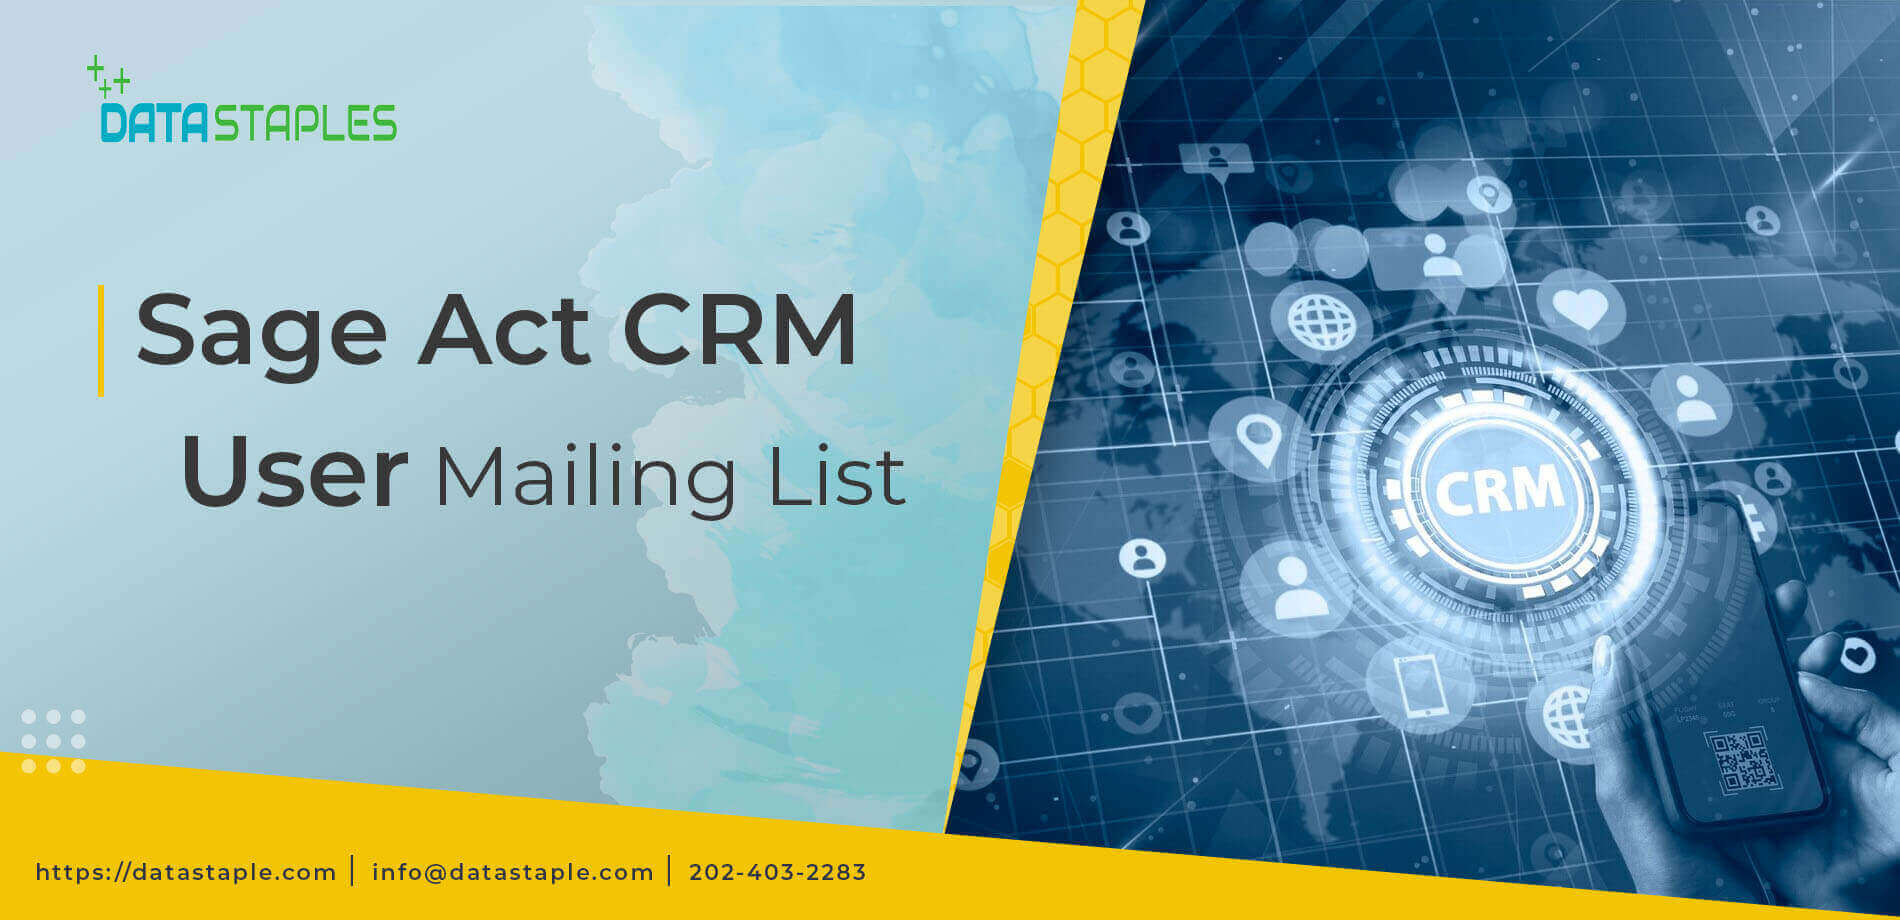 Sage ACT CRM Users Mailing List | DataStaples